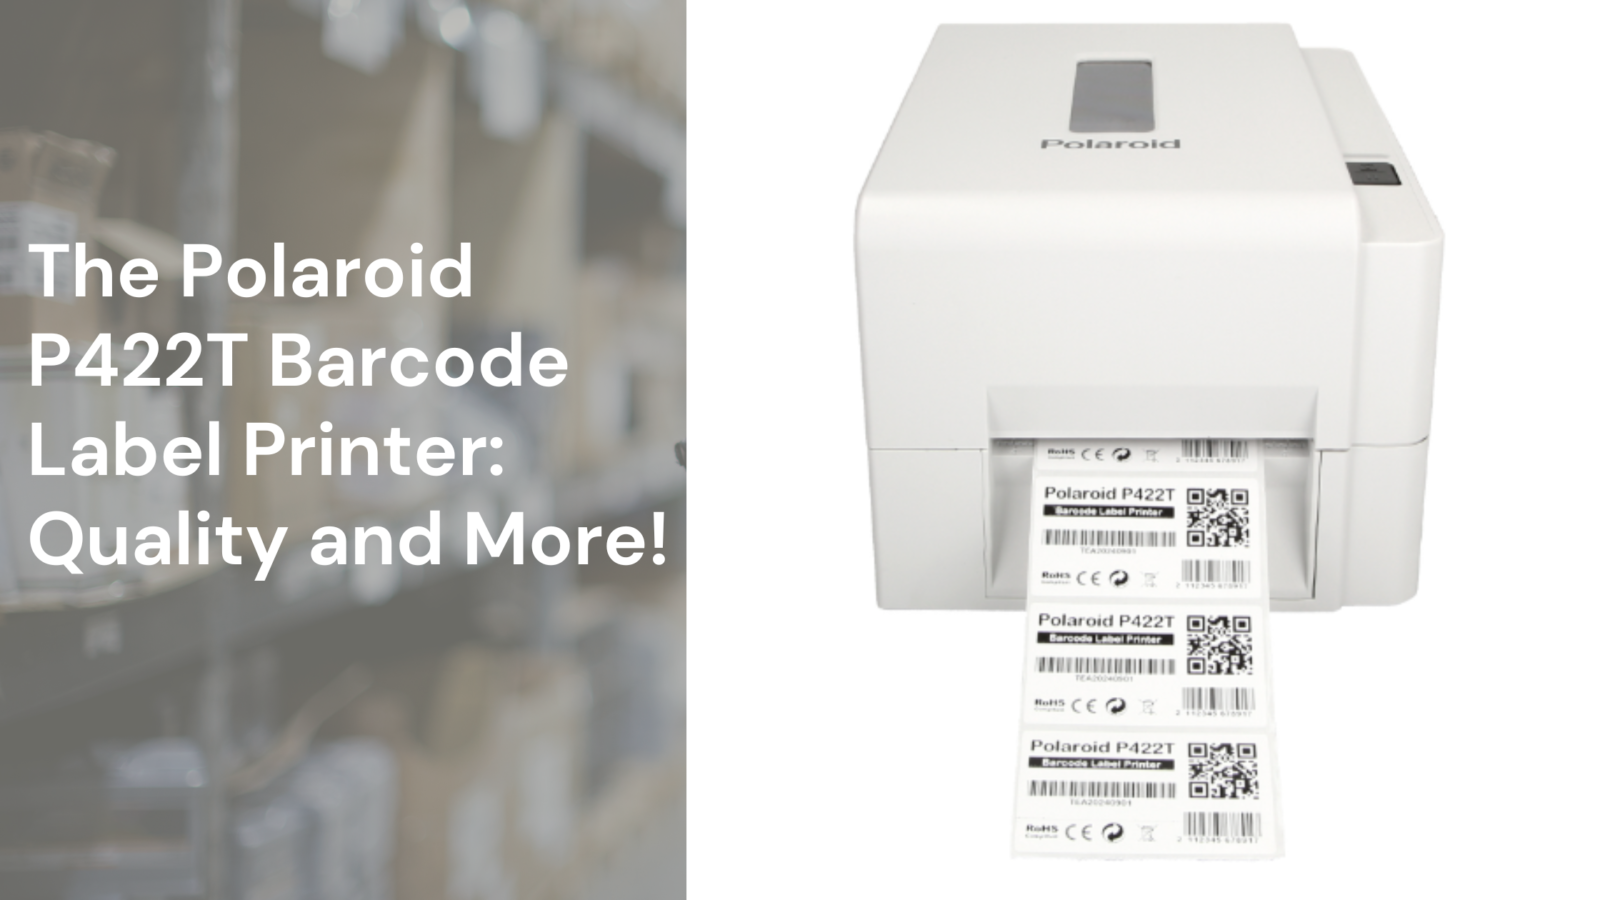 The Polaroid P422T Barcode Label Printer: Quality and More!